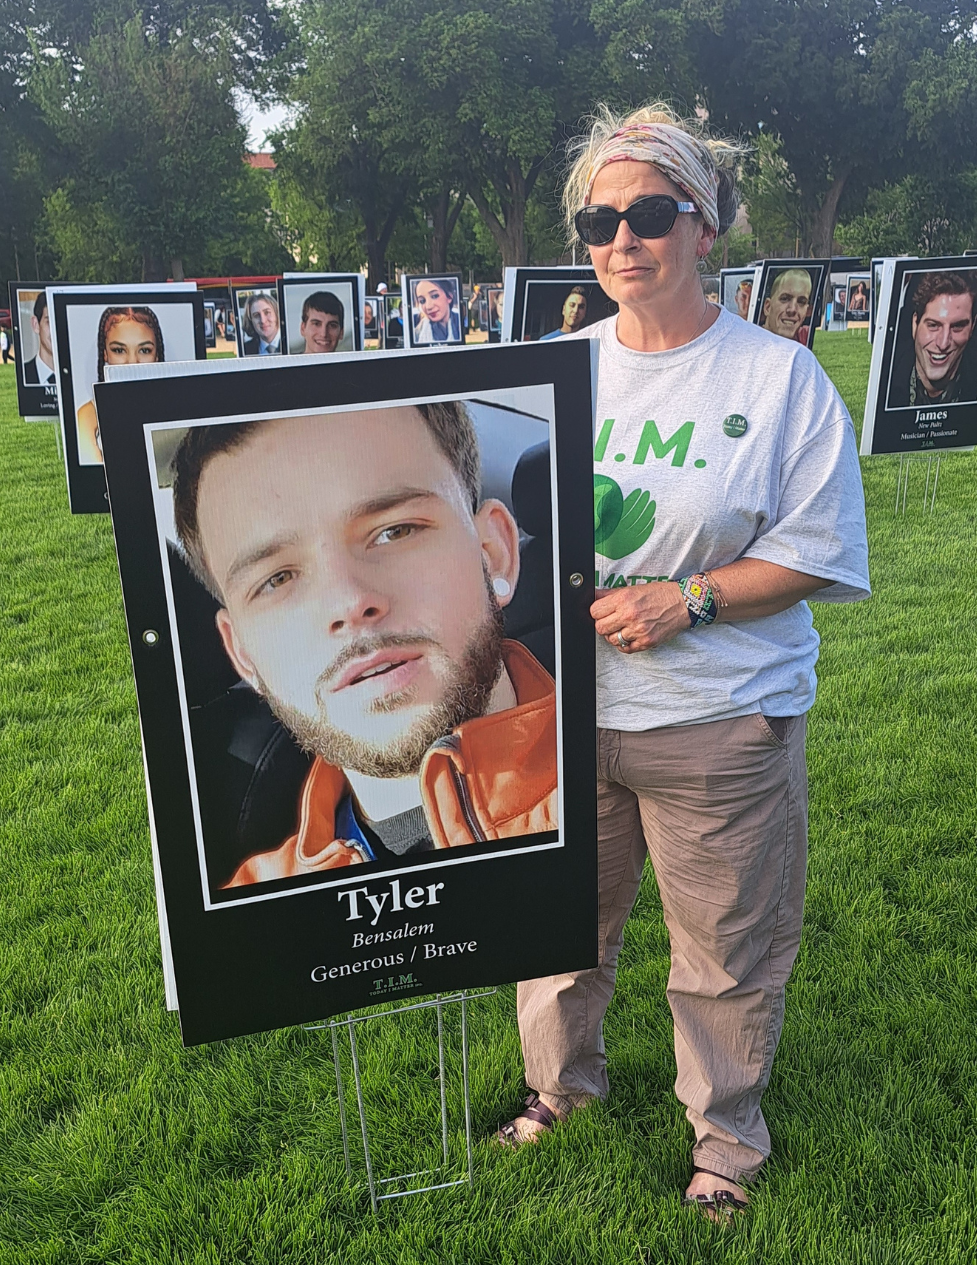 Susan Ousterman stands in a grassy area holding a poster-size photo of her son, Tyler Cordeiro. Behind her are more rows of poster-sized photographs of others who have passed away.